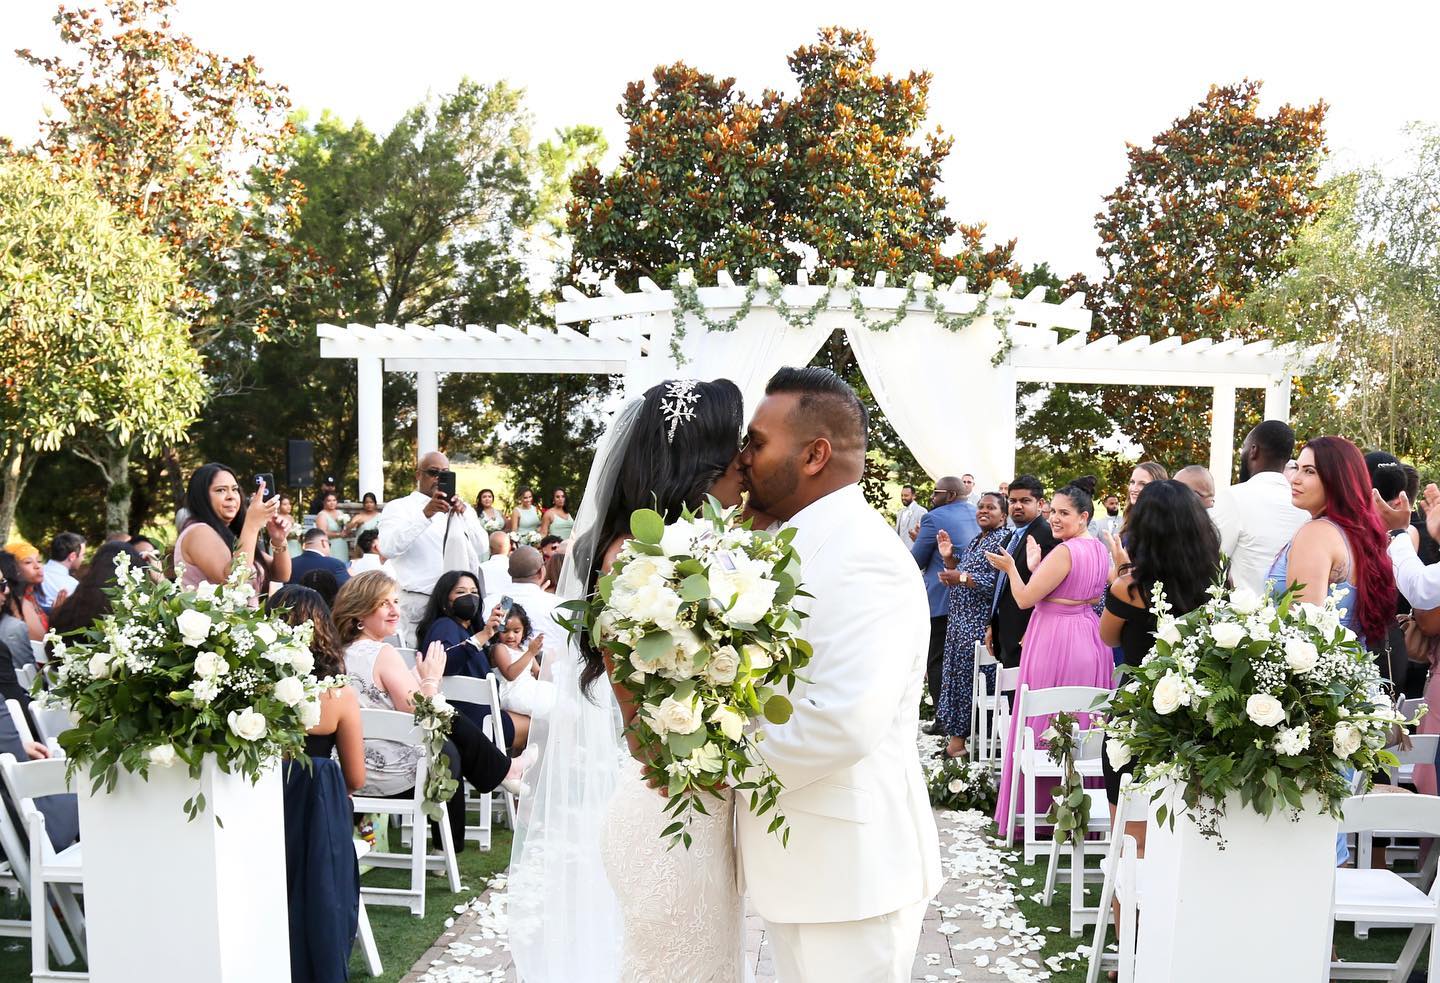 A Bride and Groom Kissing in Front of Guests